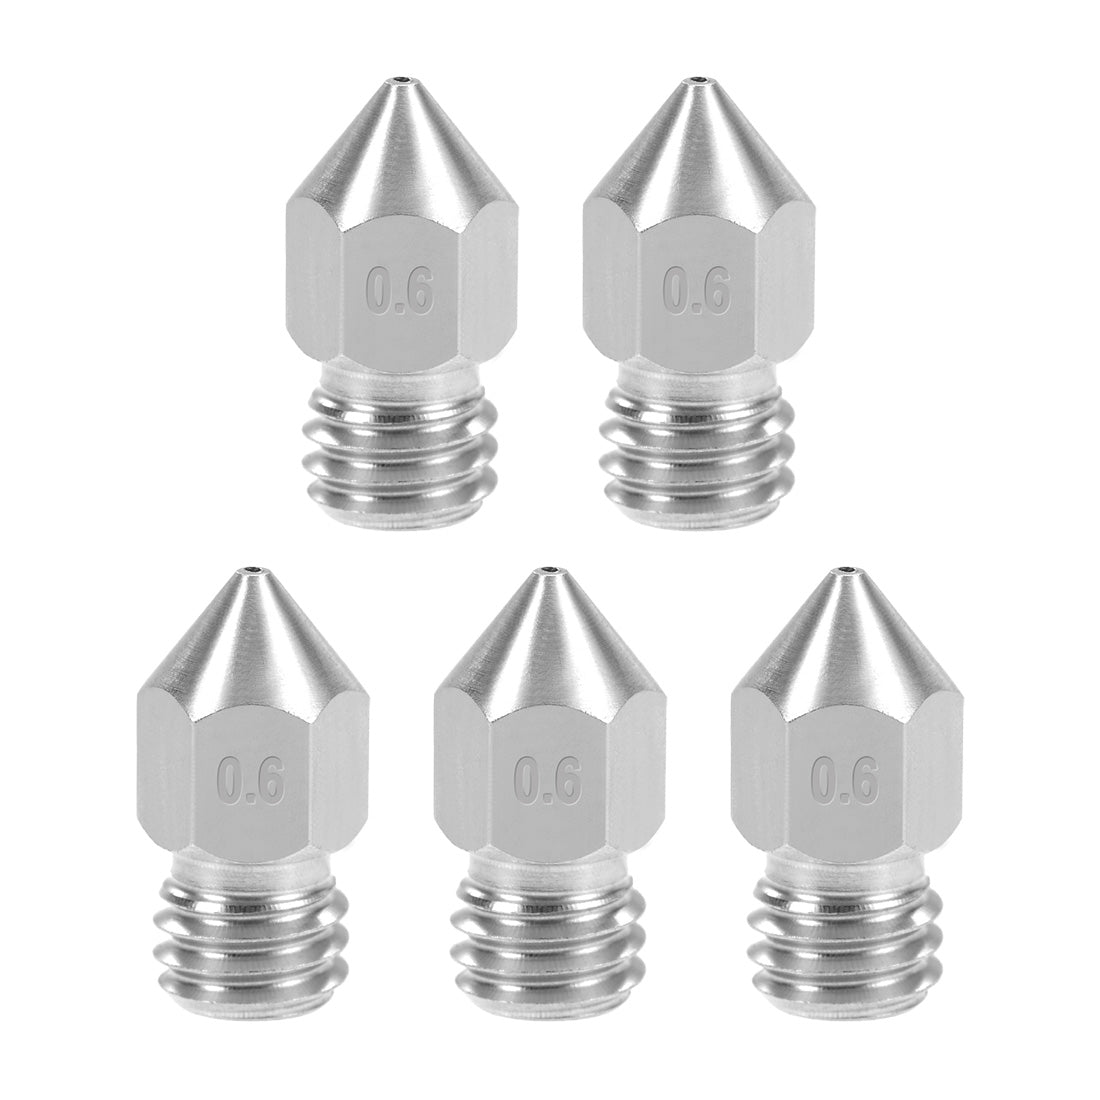 uxcell Uxcell 0.6mm 3D Printer Nozzles Head M6 Thread Replacement for MK8 1.75mm Extruder Print, Stainless Steel 5pcs